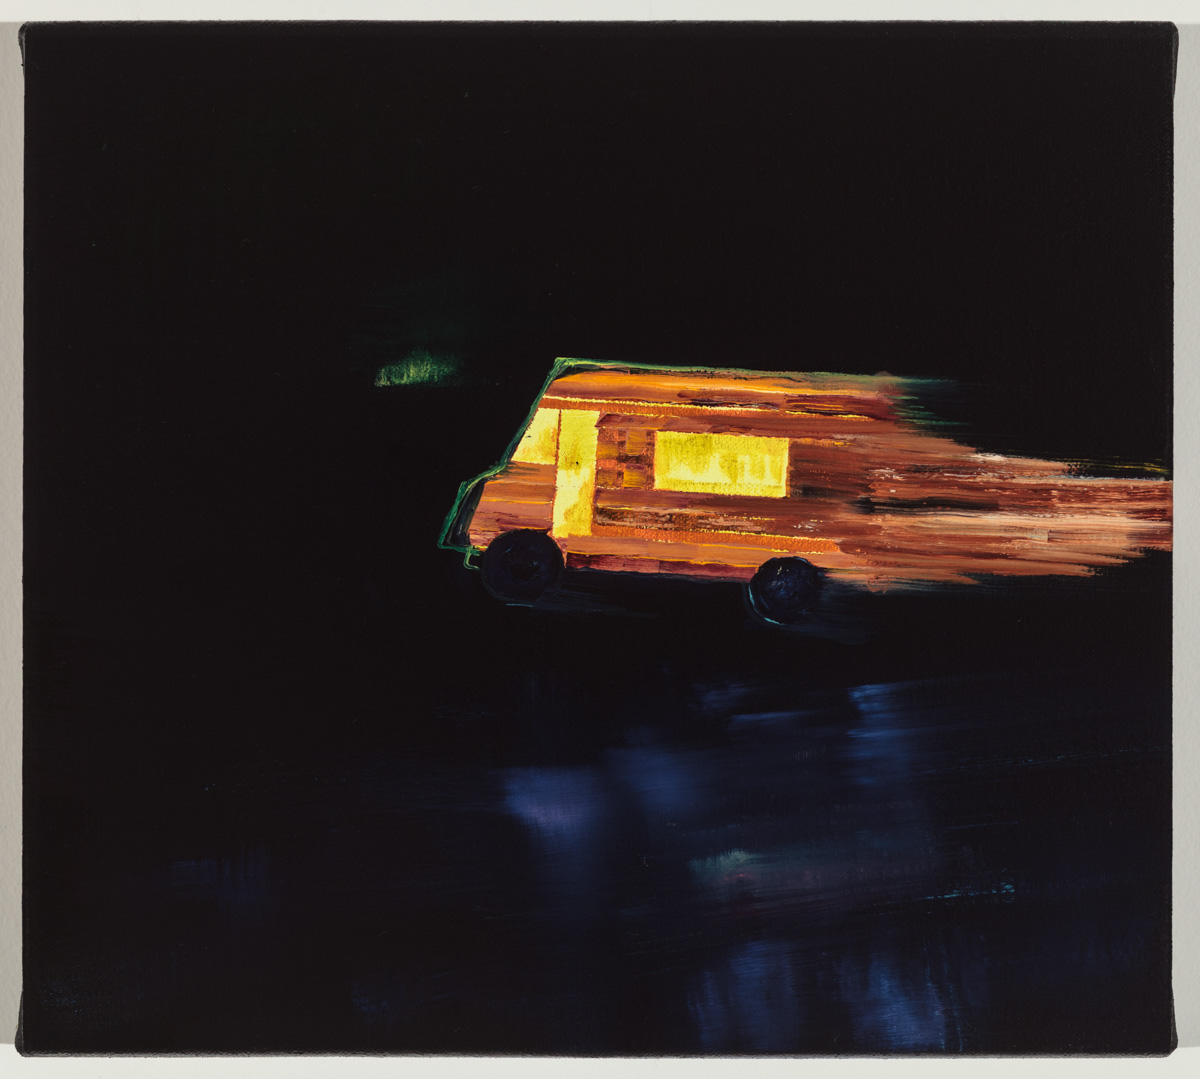  Ghost Log Cabin Food Truck, Oil on canvas, 9” x 10”  